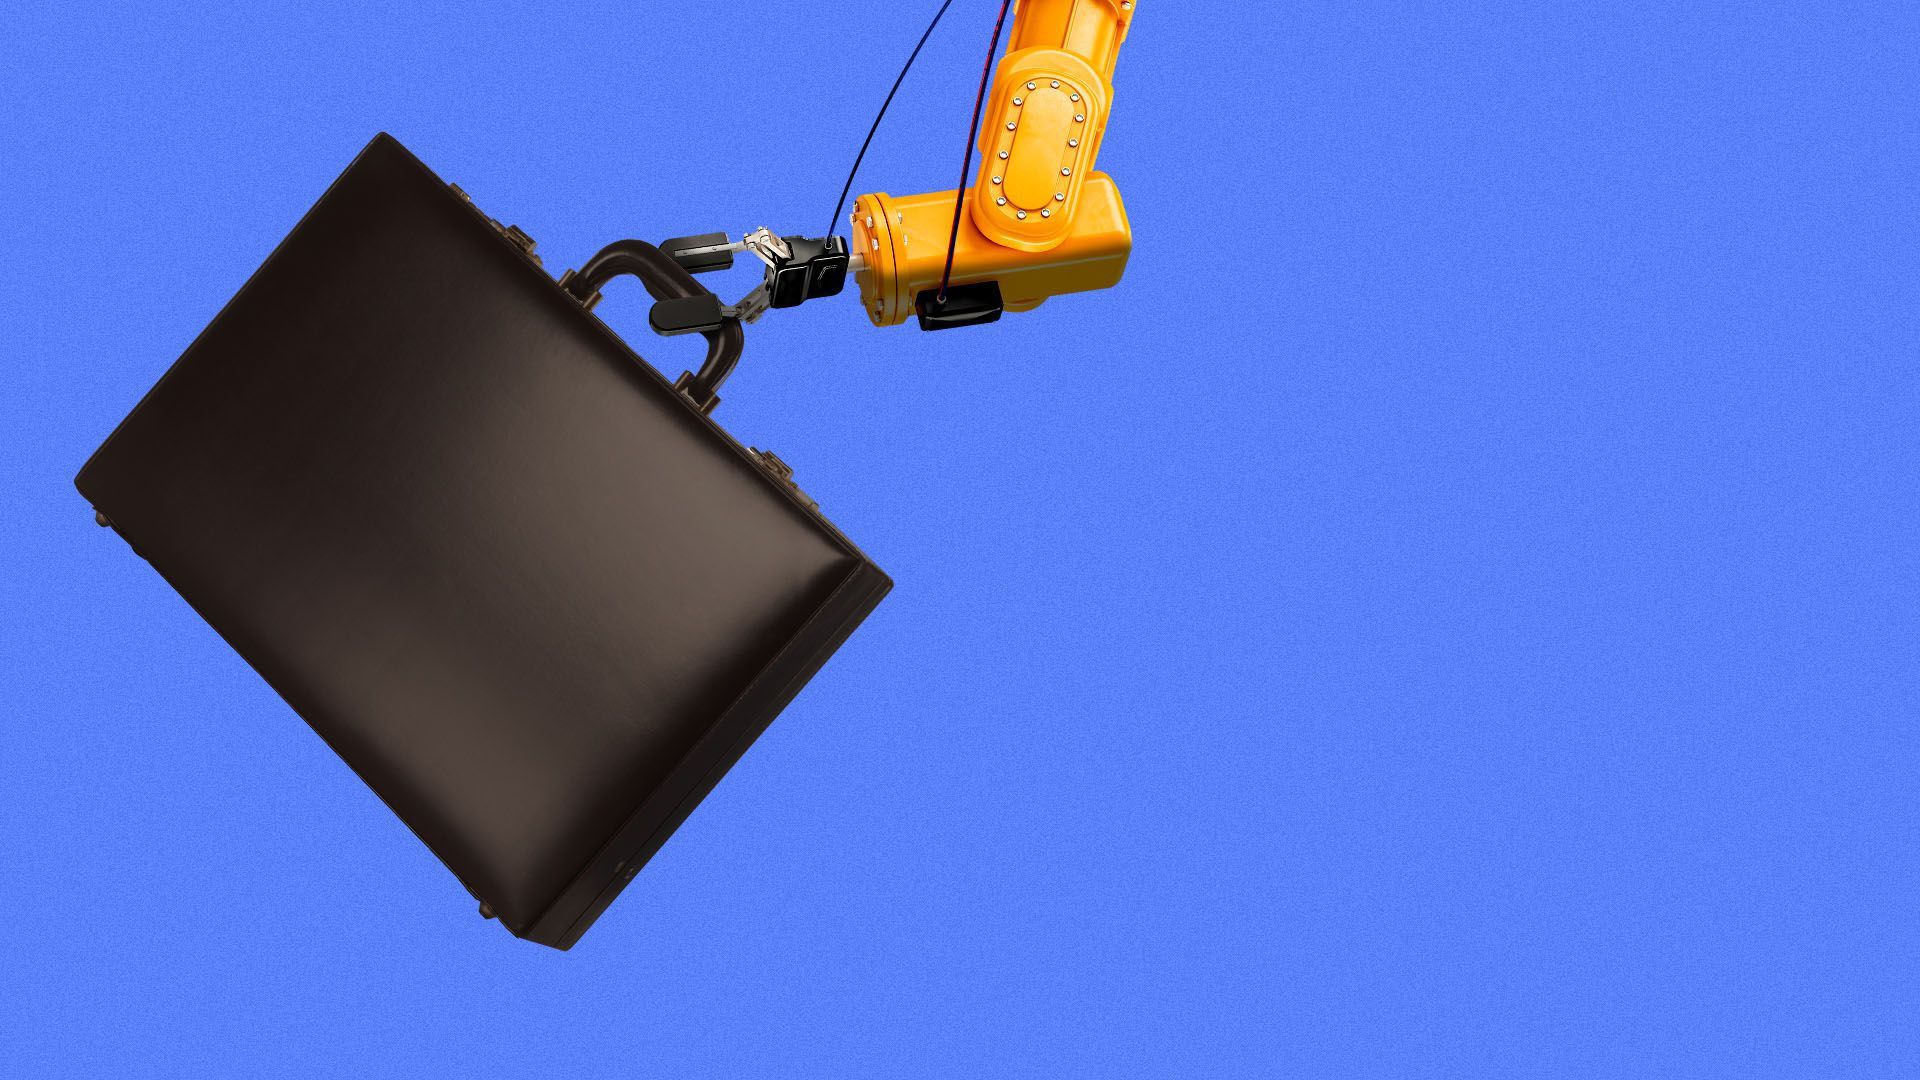 A briefcase being lifted by a crane.